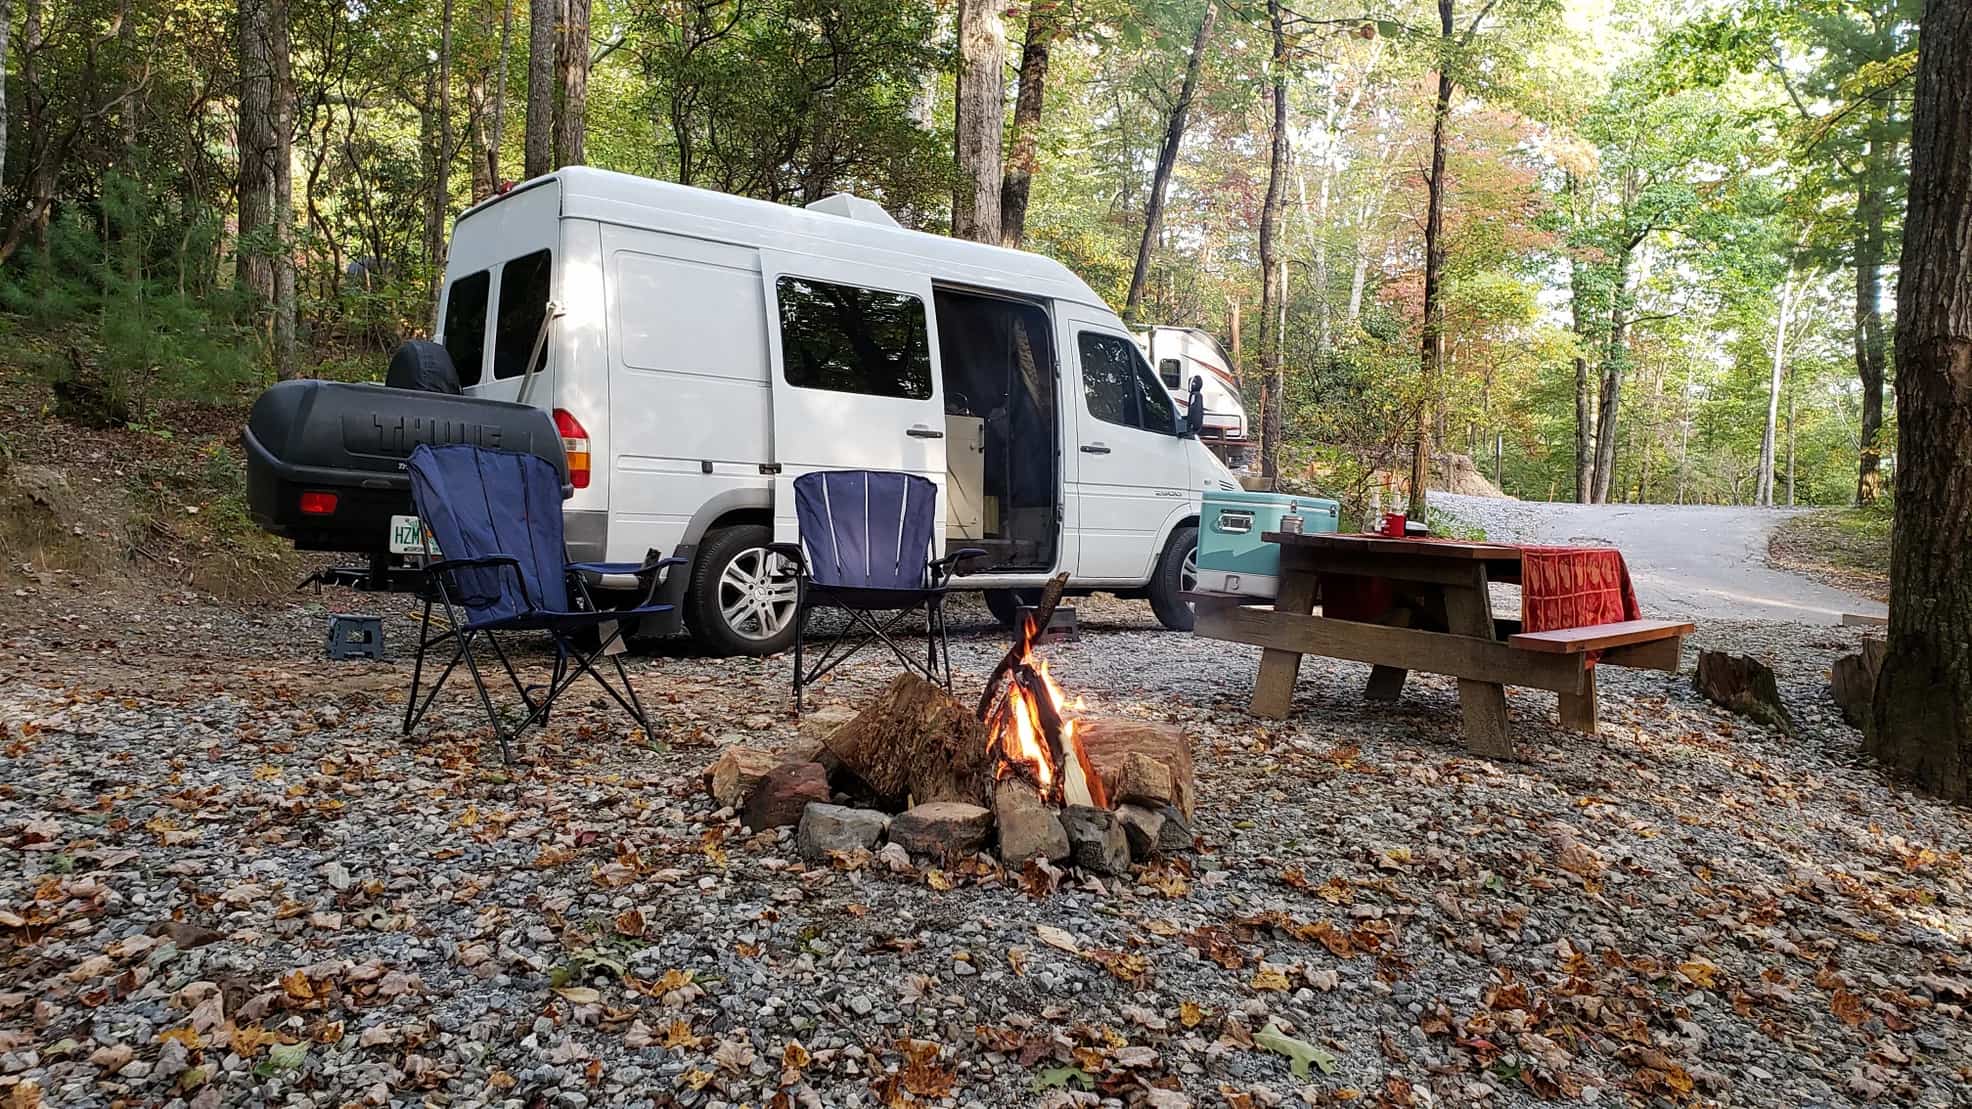 Van parked in campsite beside blazing campfire and picnic table.